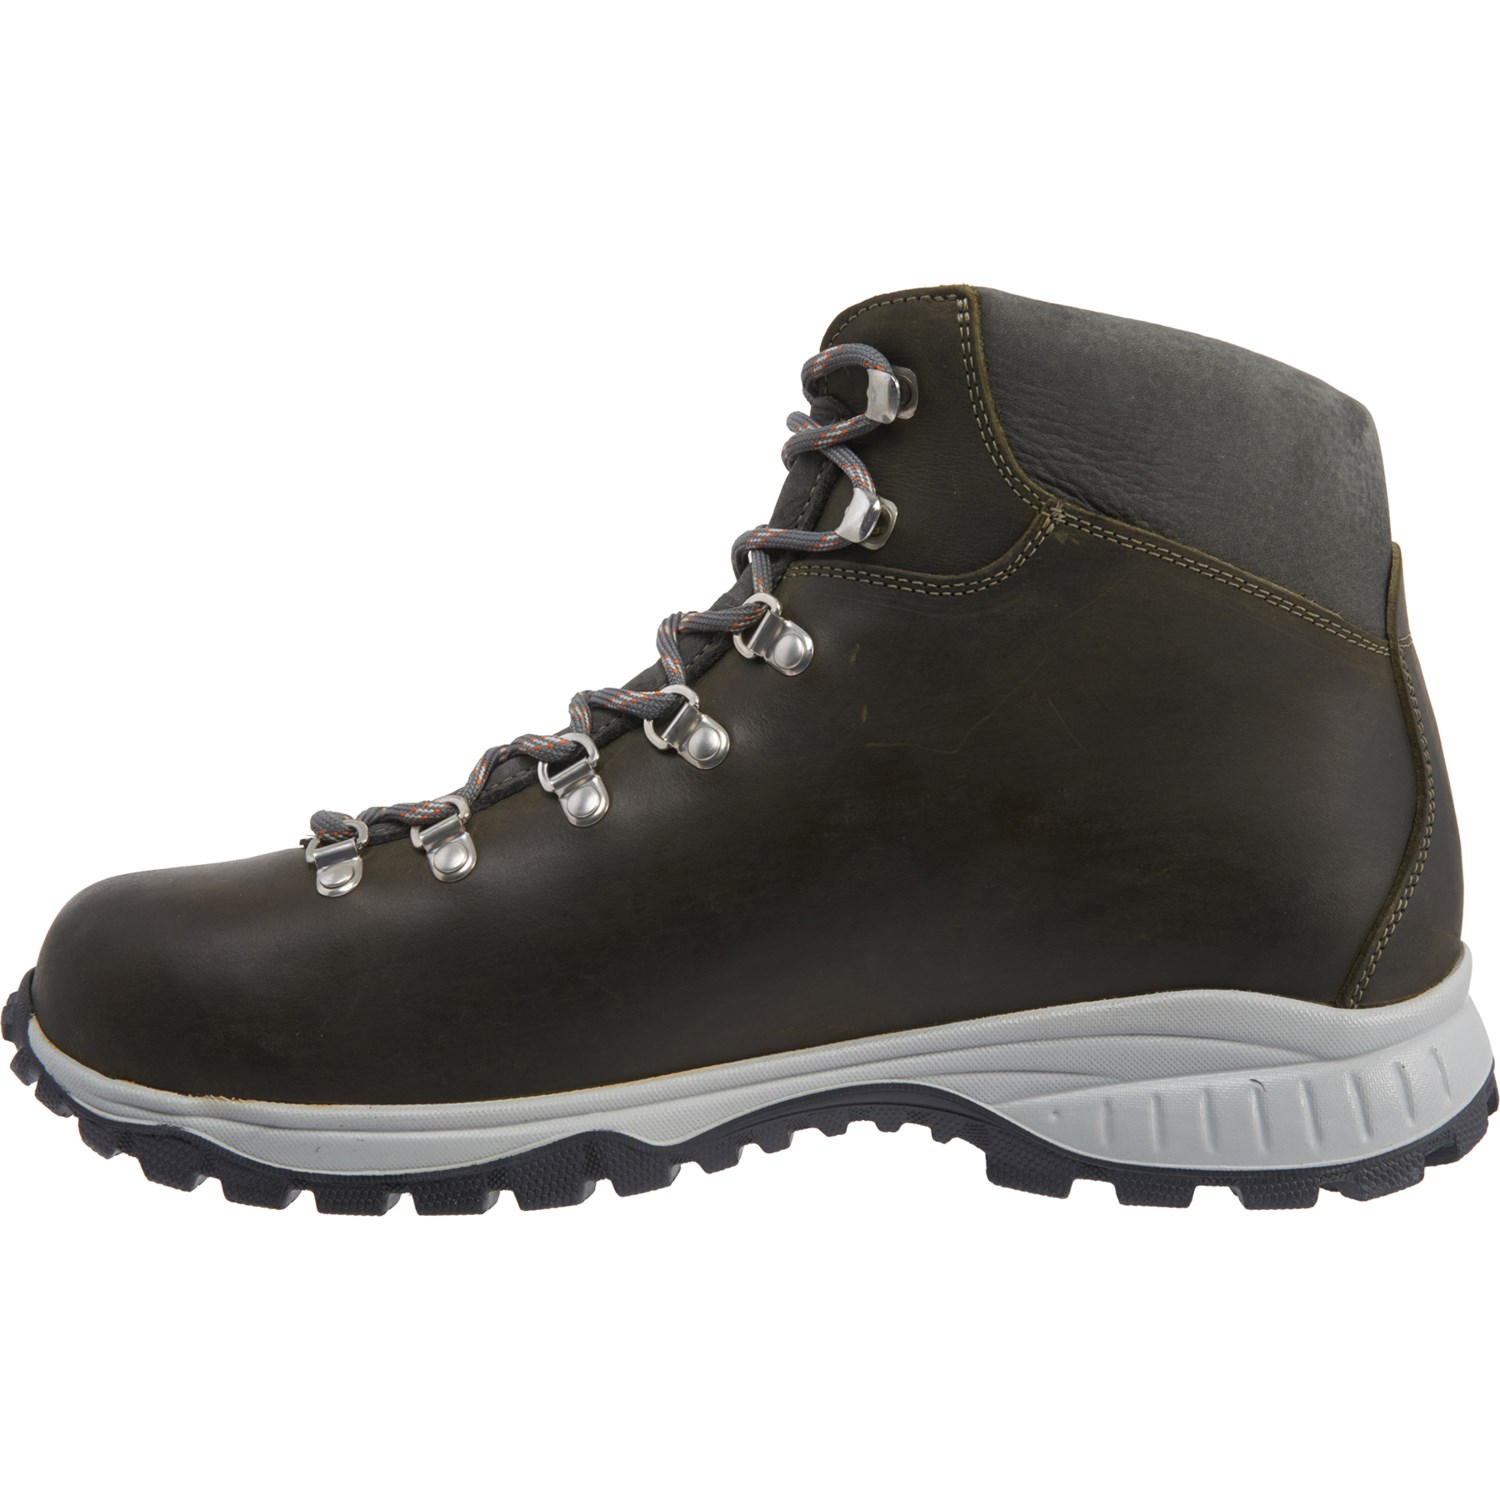 Alico Made in Italy Portland Hiking Boots (For Men) - Save 40%